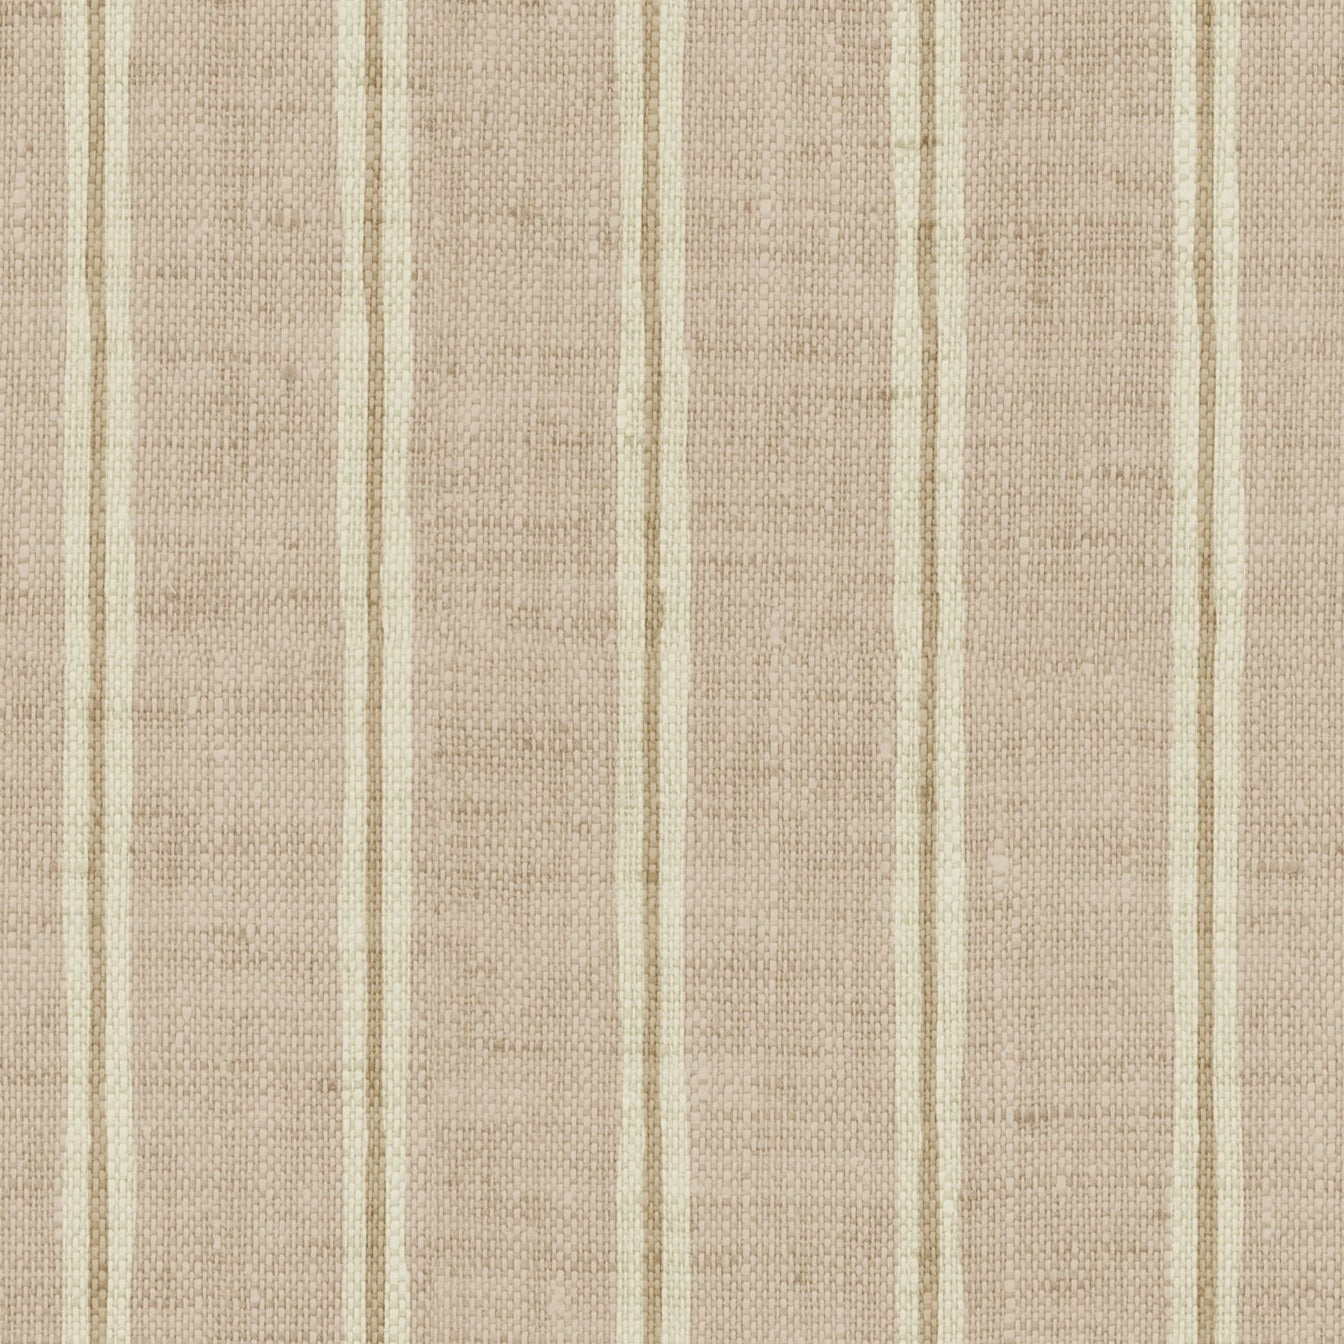 A close-up view of the 'Ticking Fabrics 2 Wallpaper', displaying a classic ticking stripe pattern in beige and cream. The timeless design mimics the look of woven fabric, offering a subtle, textured appearance that adds depth and warmth to any space.